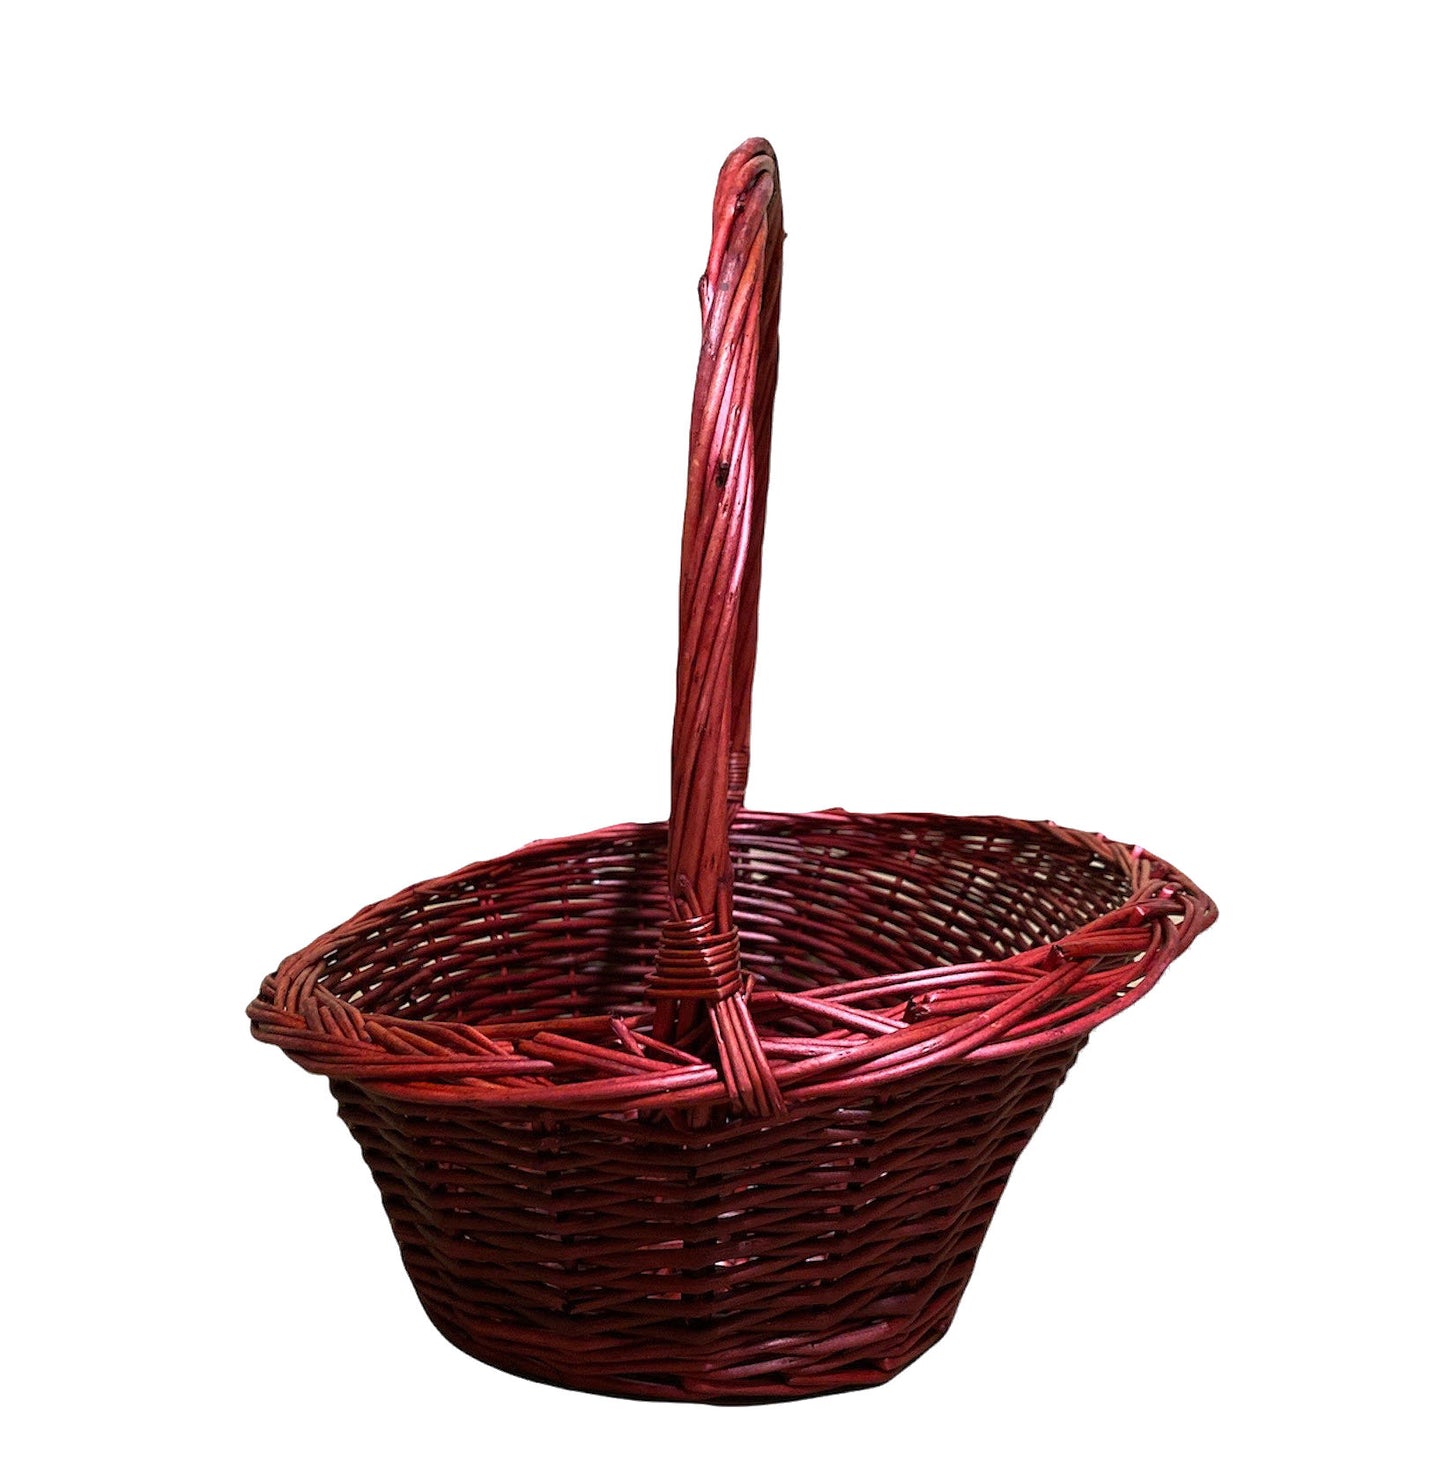 Sloped Oval Willow Baskets - Wine Ruby - Small - 12.5 x 10.5 inch 12.5 Handle - Fits a 20x30 basket bag - New fall 2021